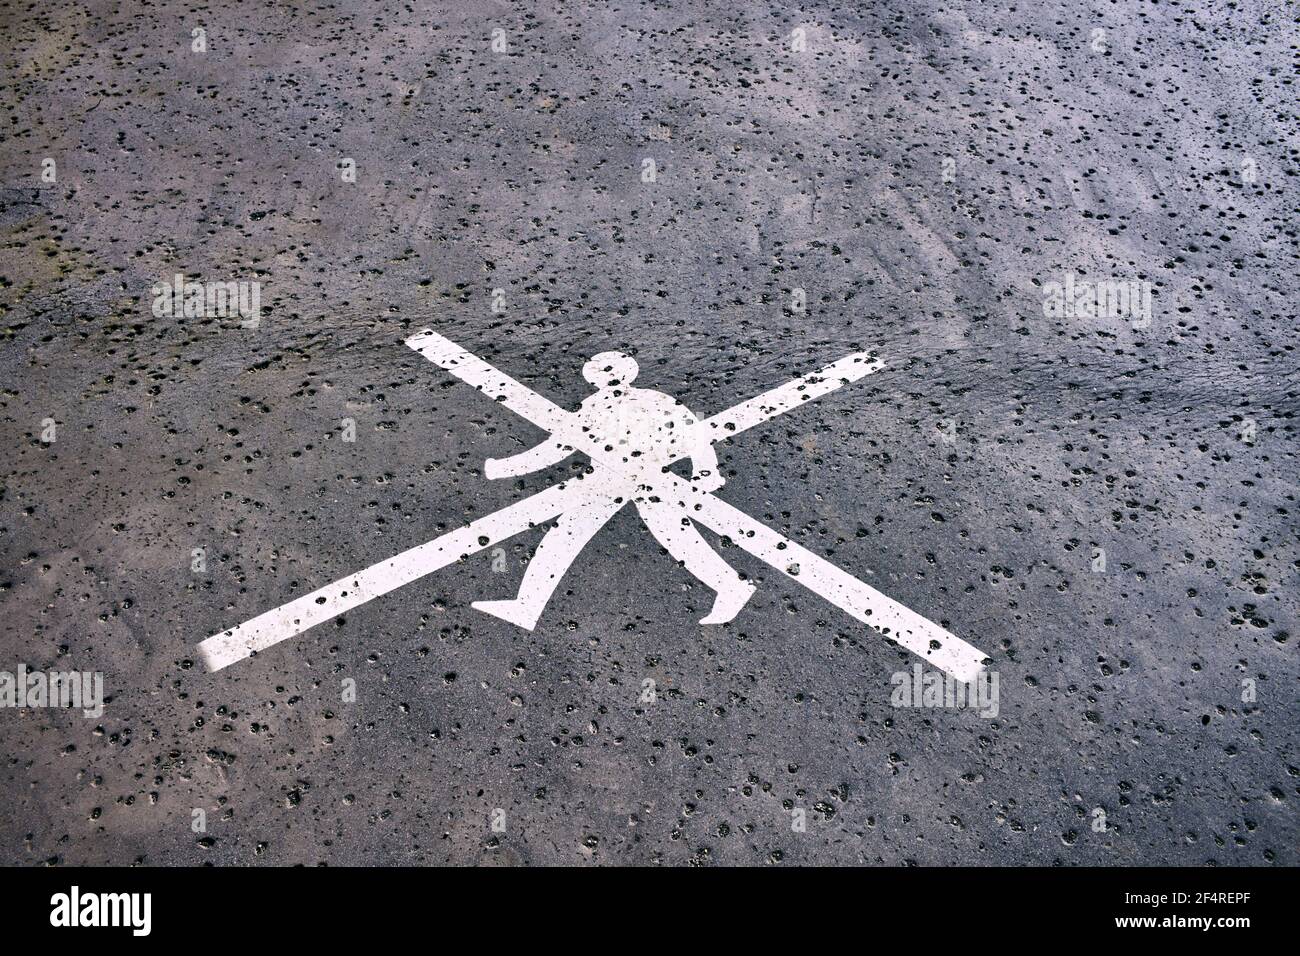 Crossed out person image on a tarmac surface Stock Photo